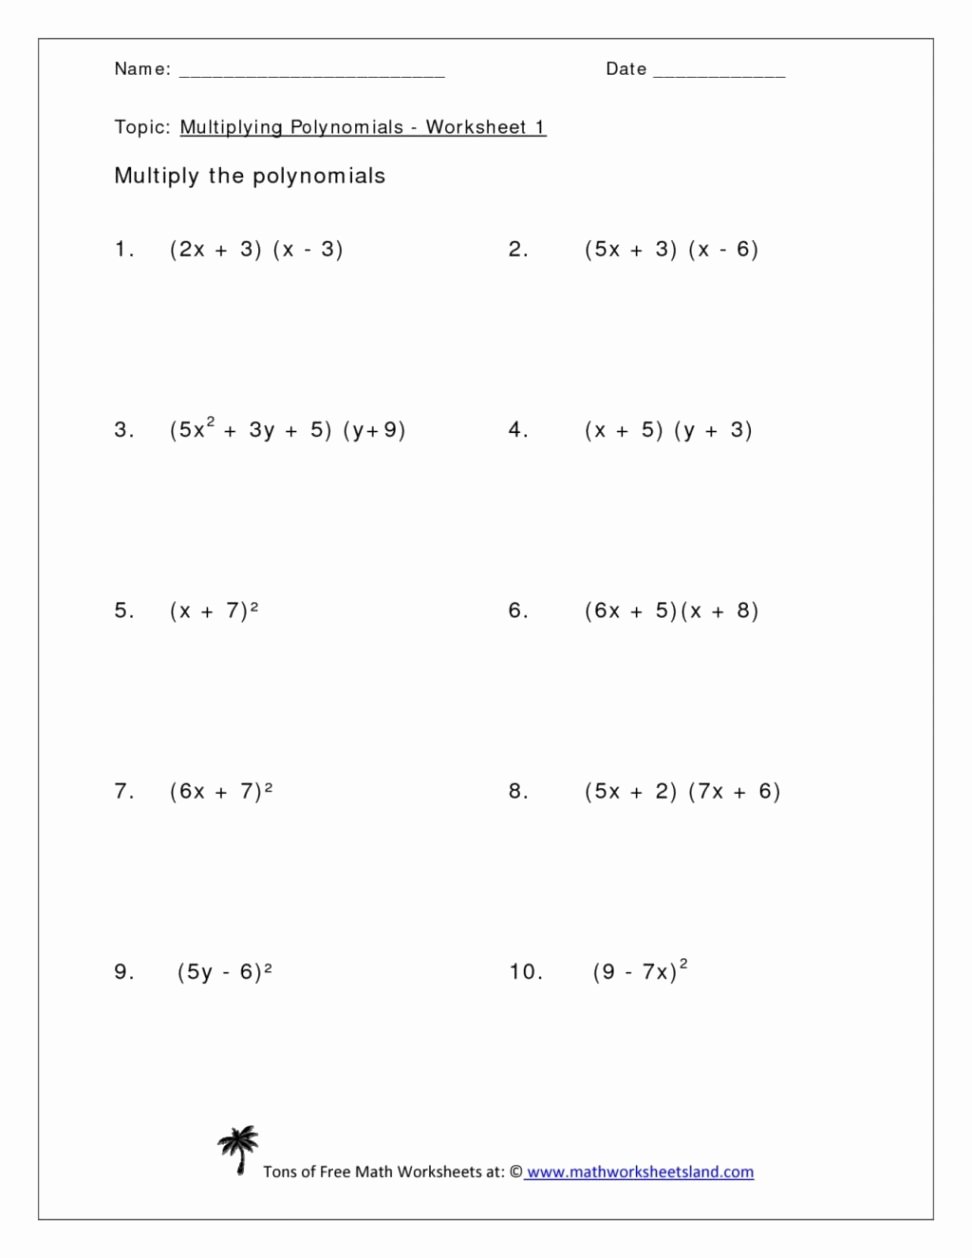 Multiplying Scientific Notation Worksheet Fresh Mathworksheetsland Scientific Notation Multiplication and